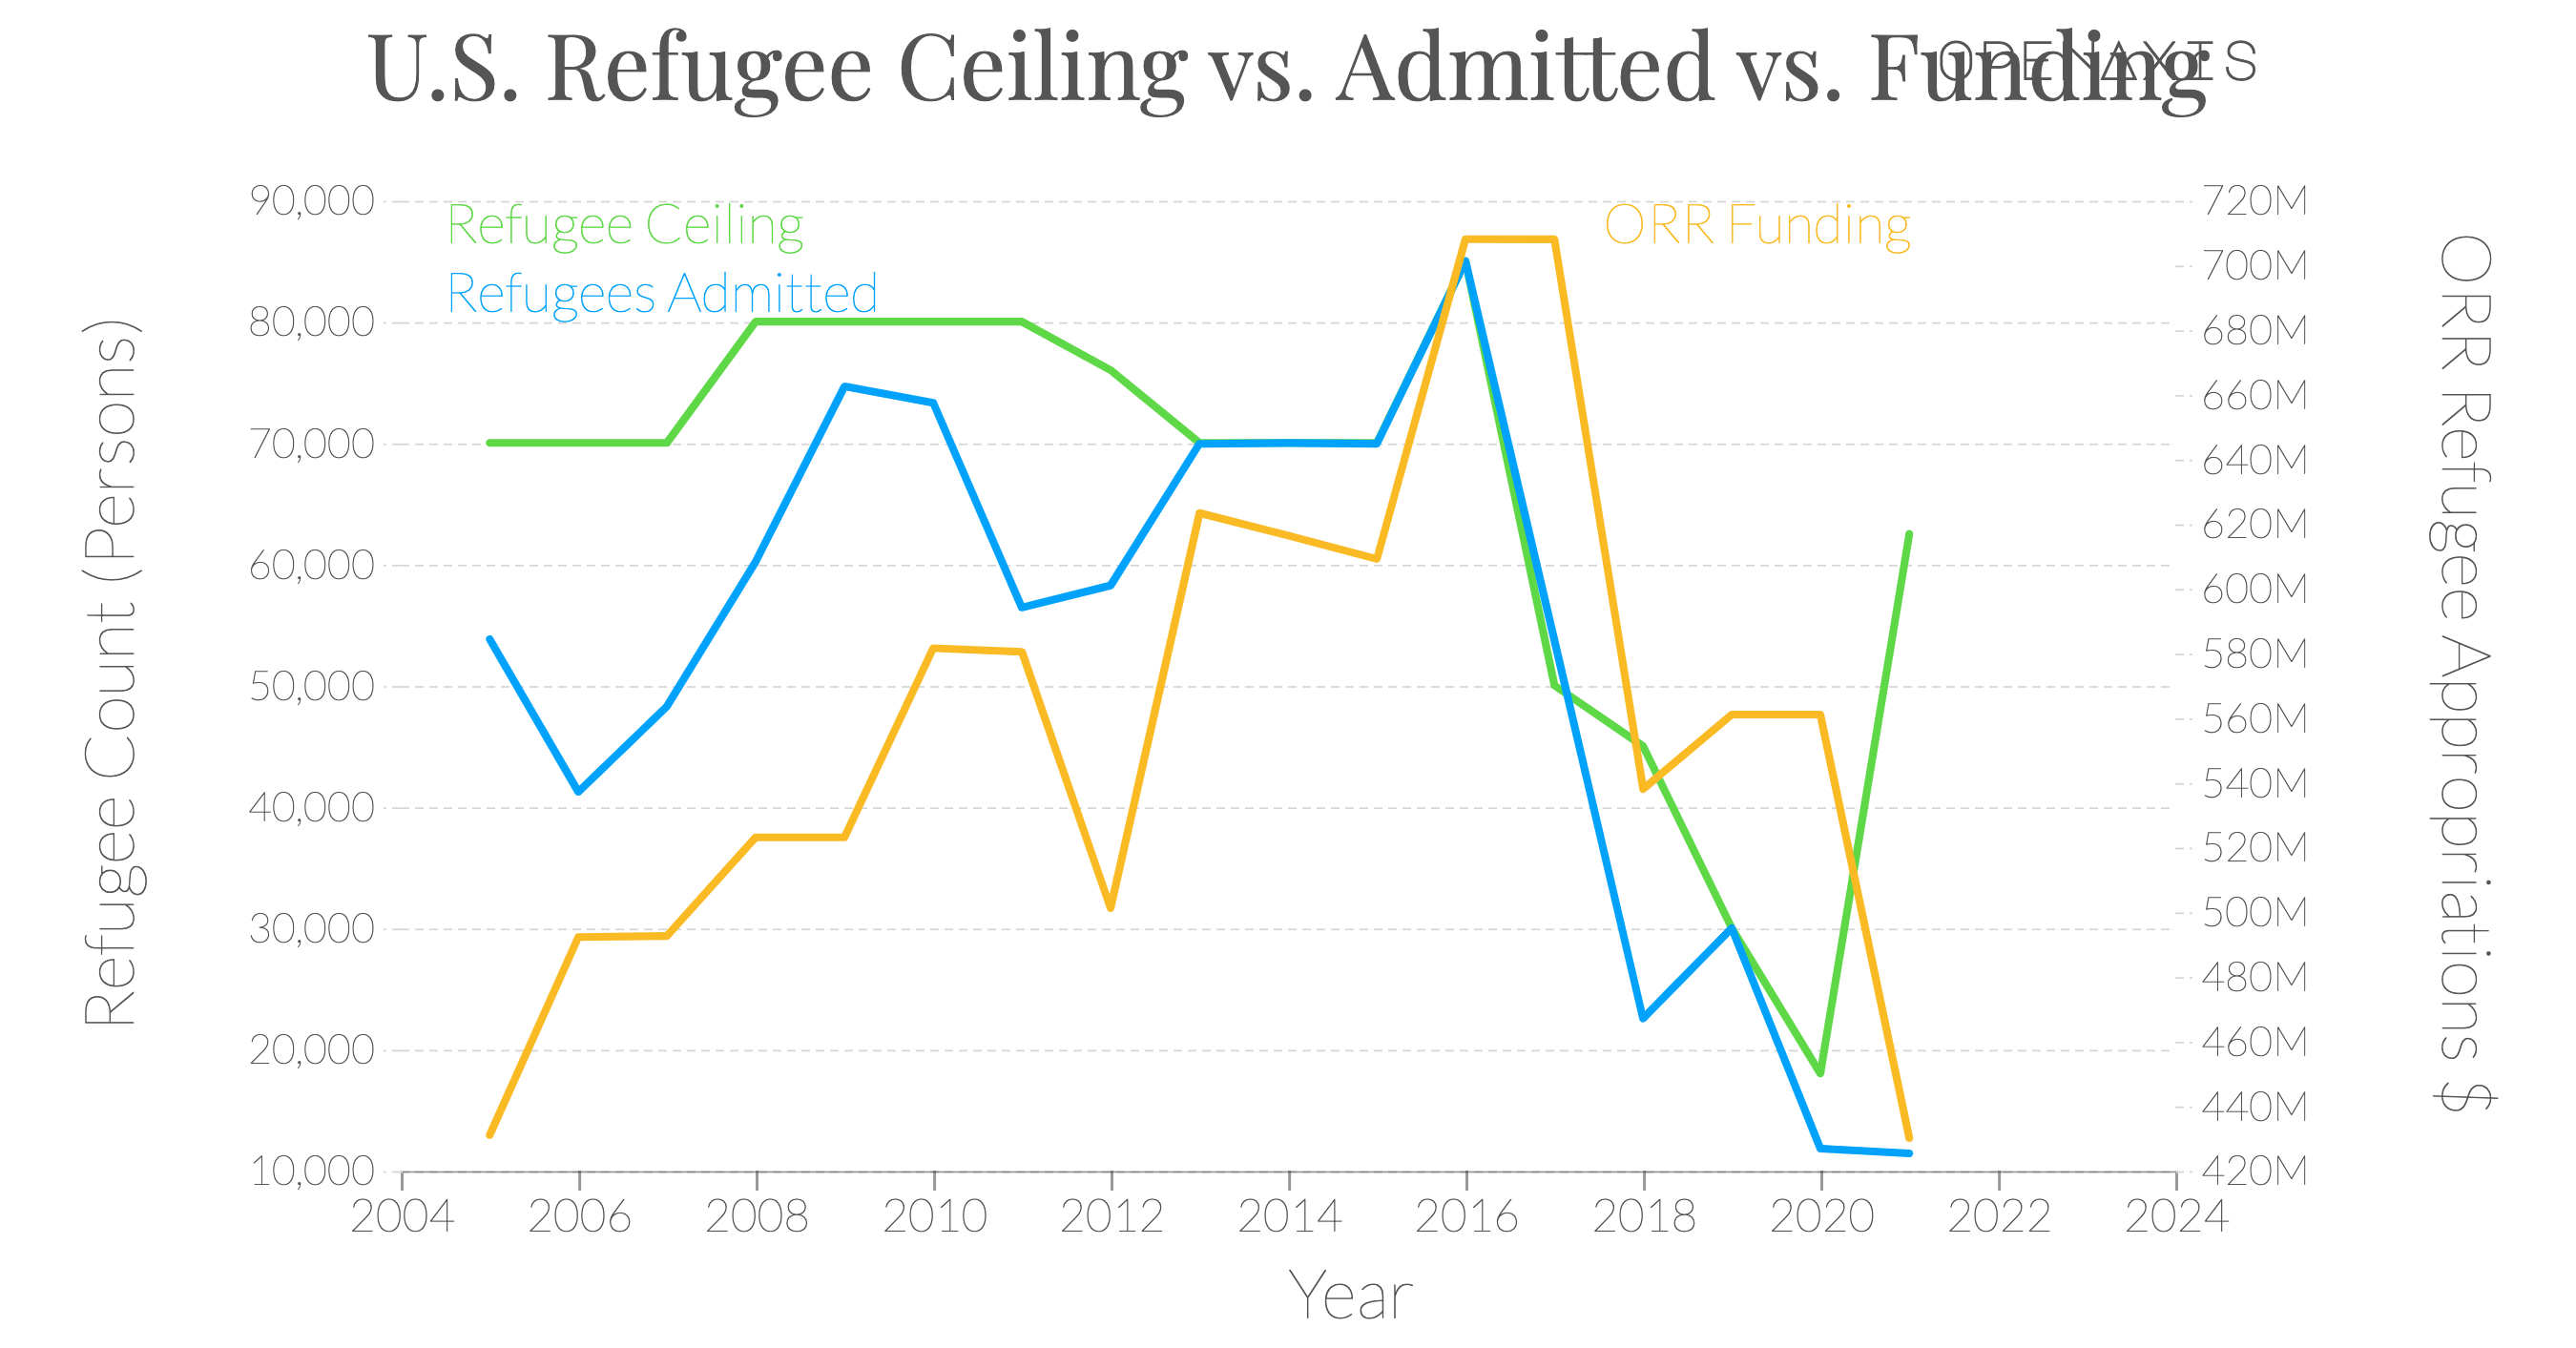 <p>Source: U.S. Department of Health and Human Services (funding), Migration Policy Institute (refugee ceiling and admissions count)</p><p><br /></p><p>#refugee</p>